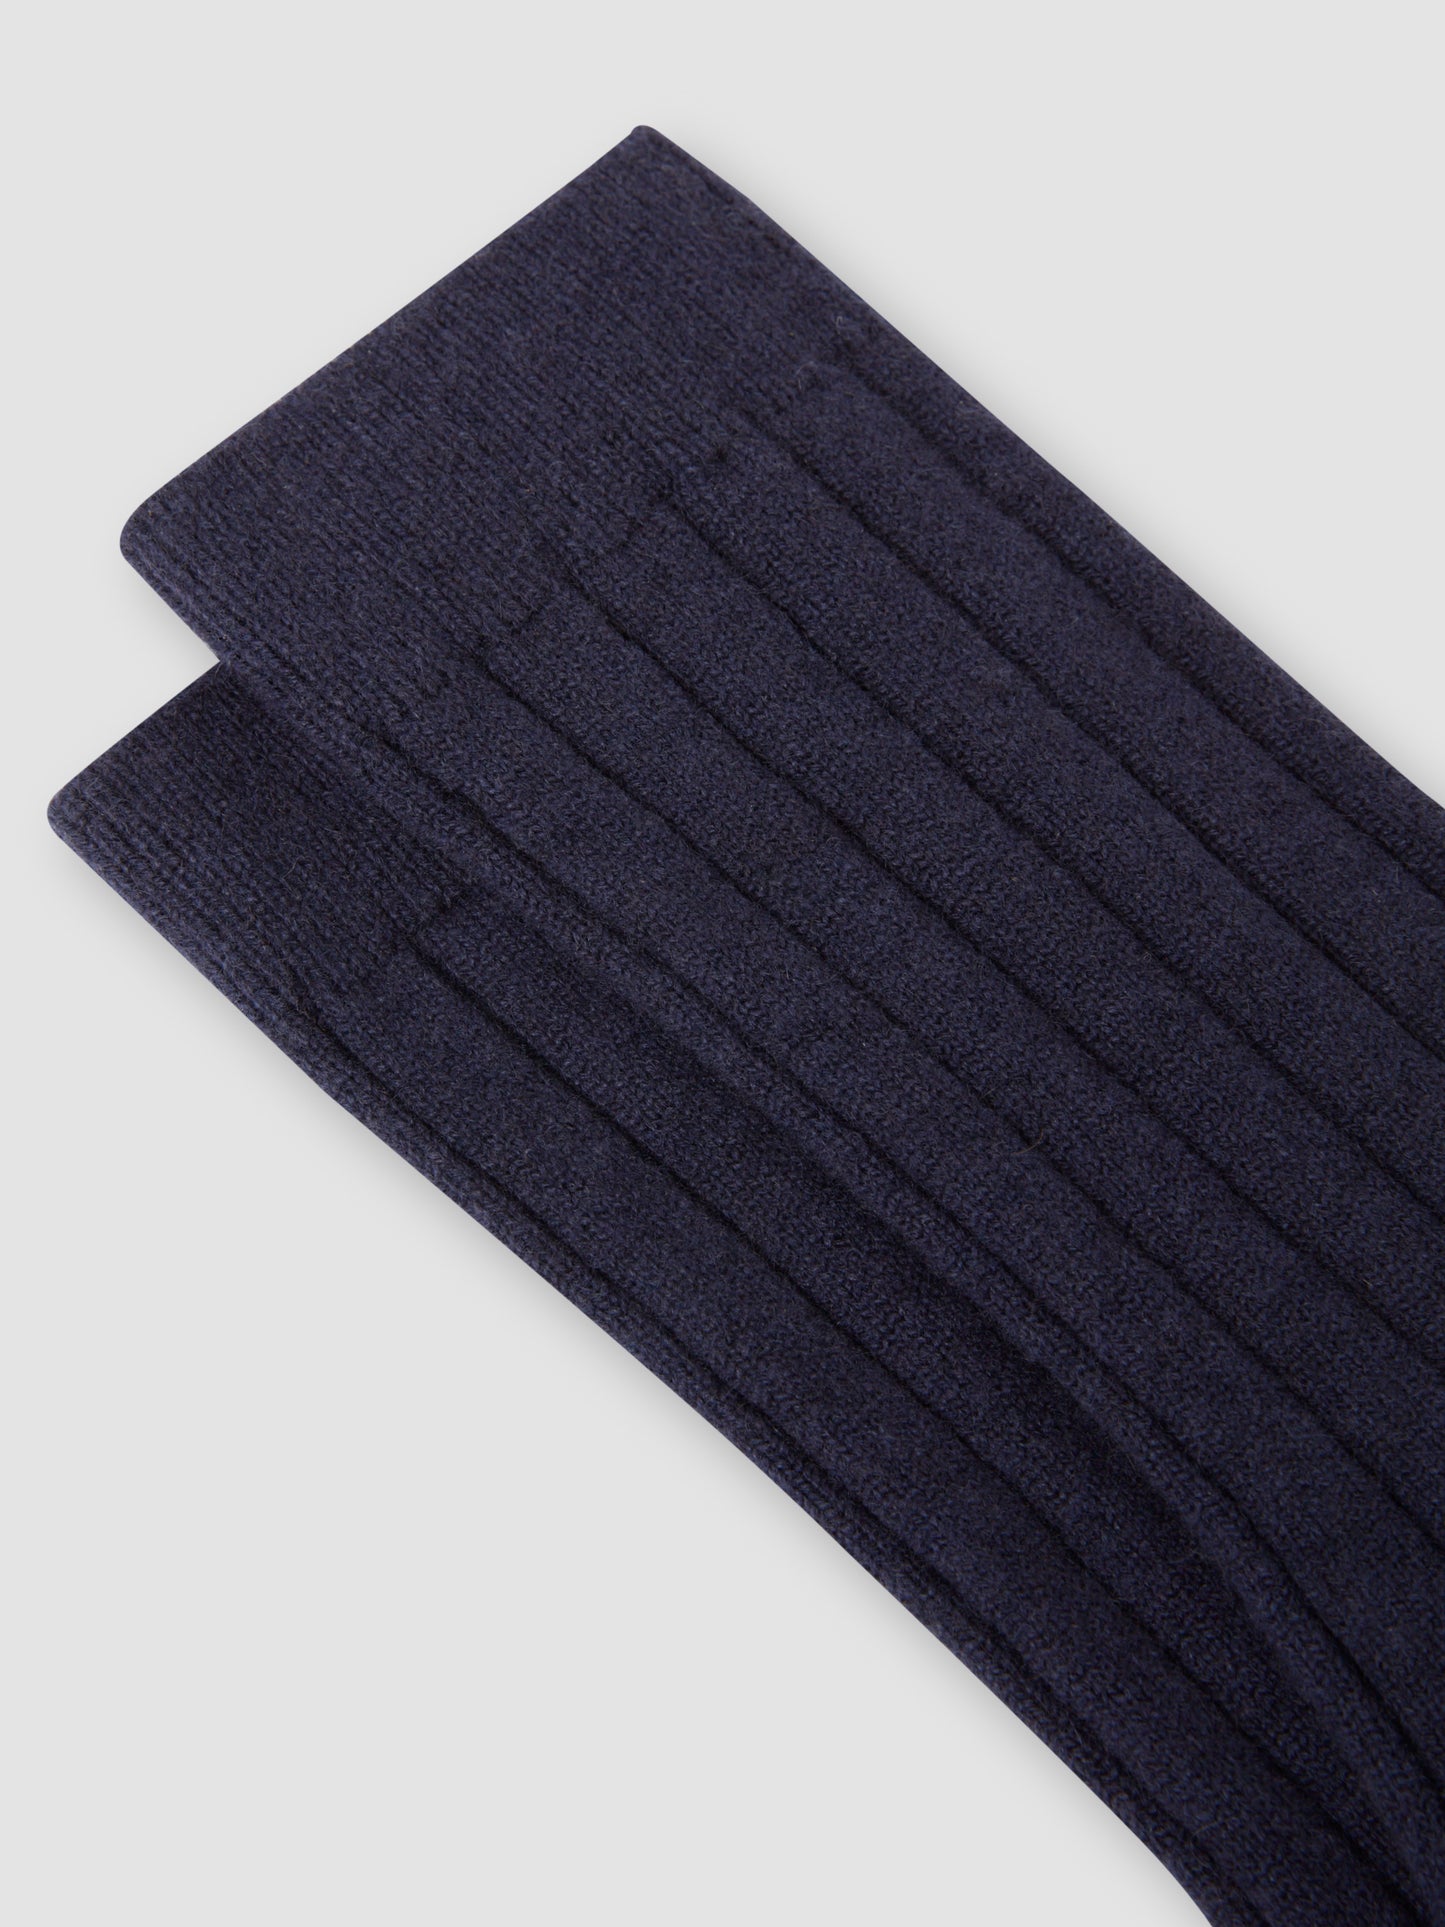 Cashmere Knitted Socks Navy Product image Detail